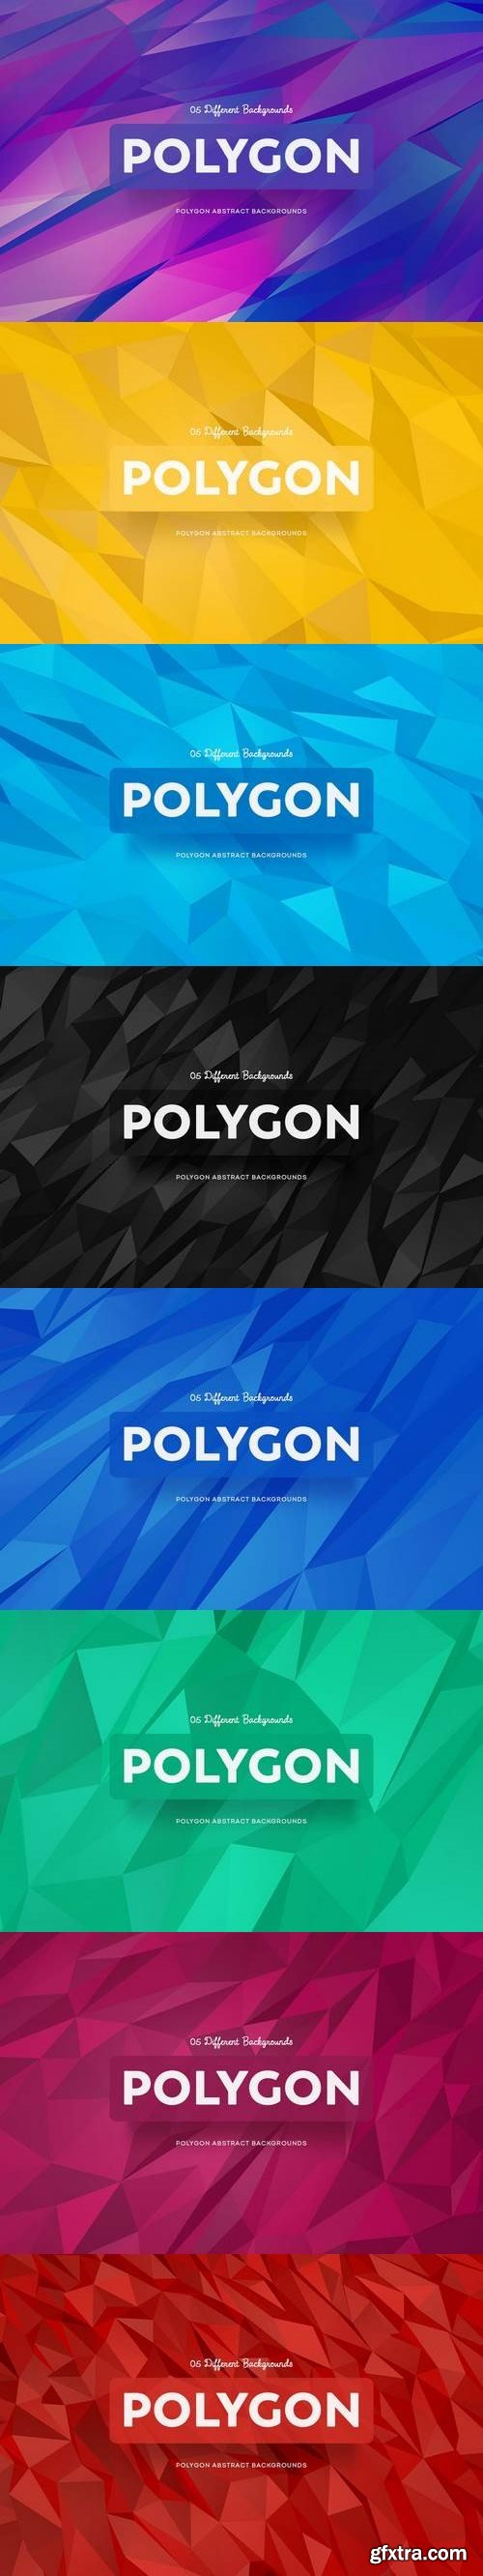 Polygon Abstract Backgrounds Bundle